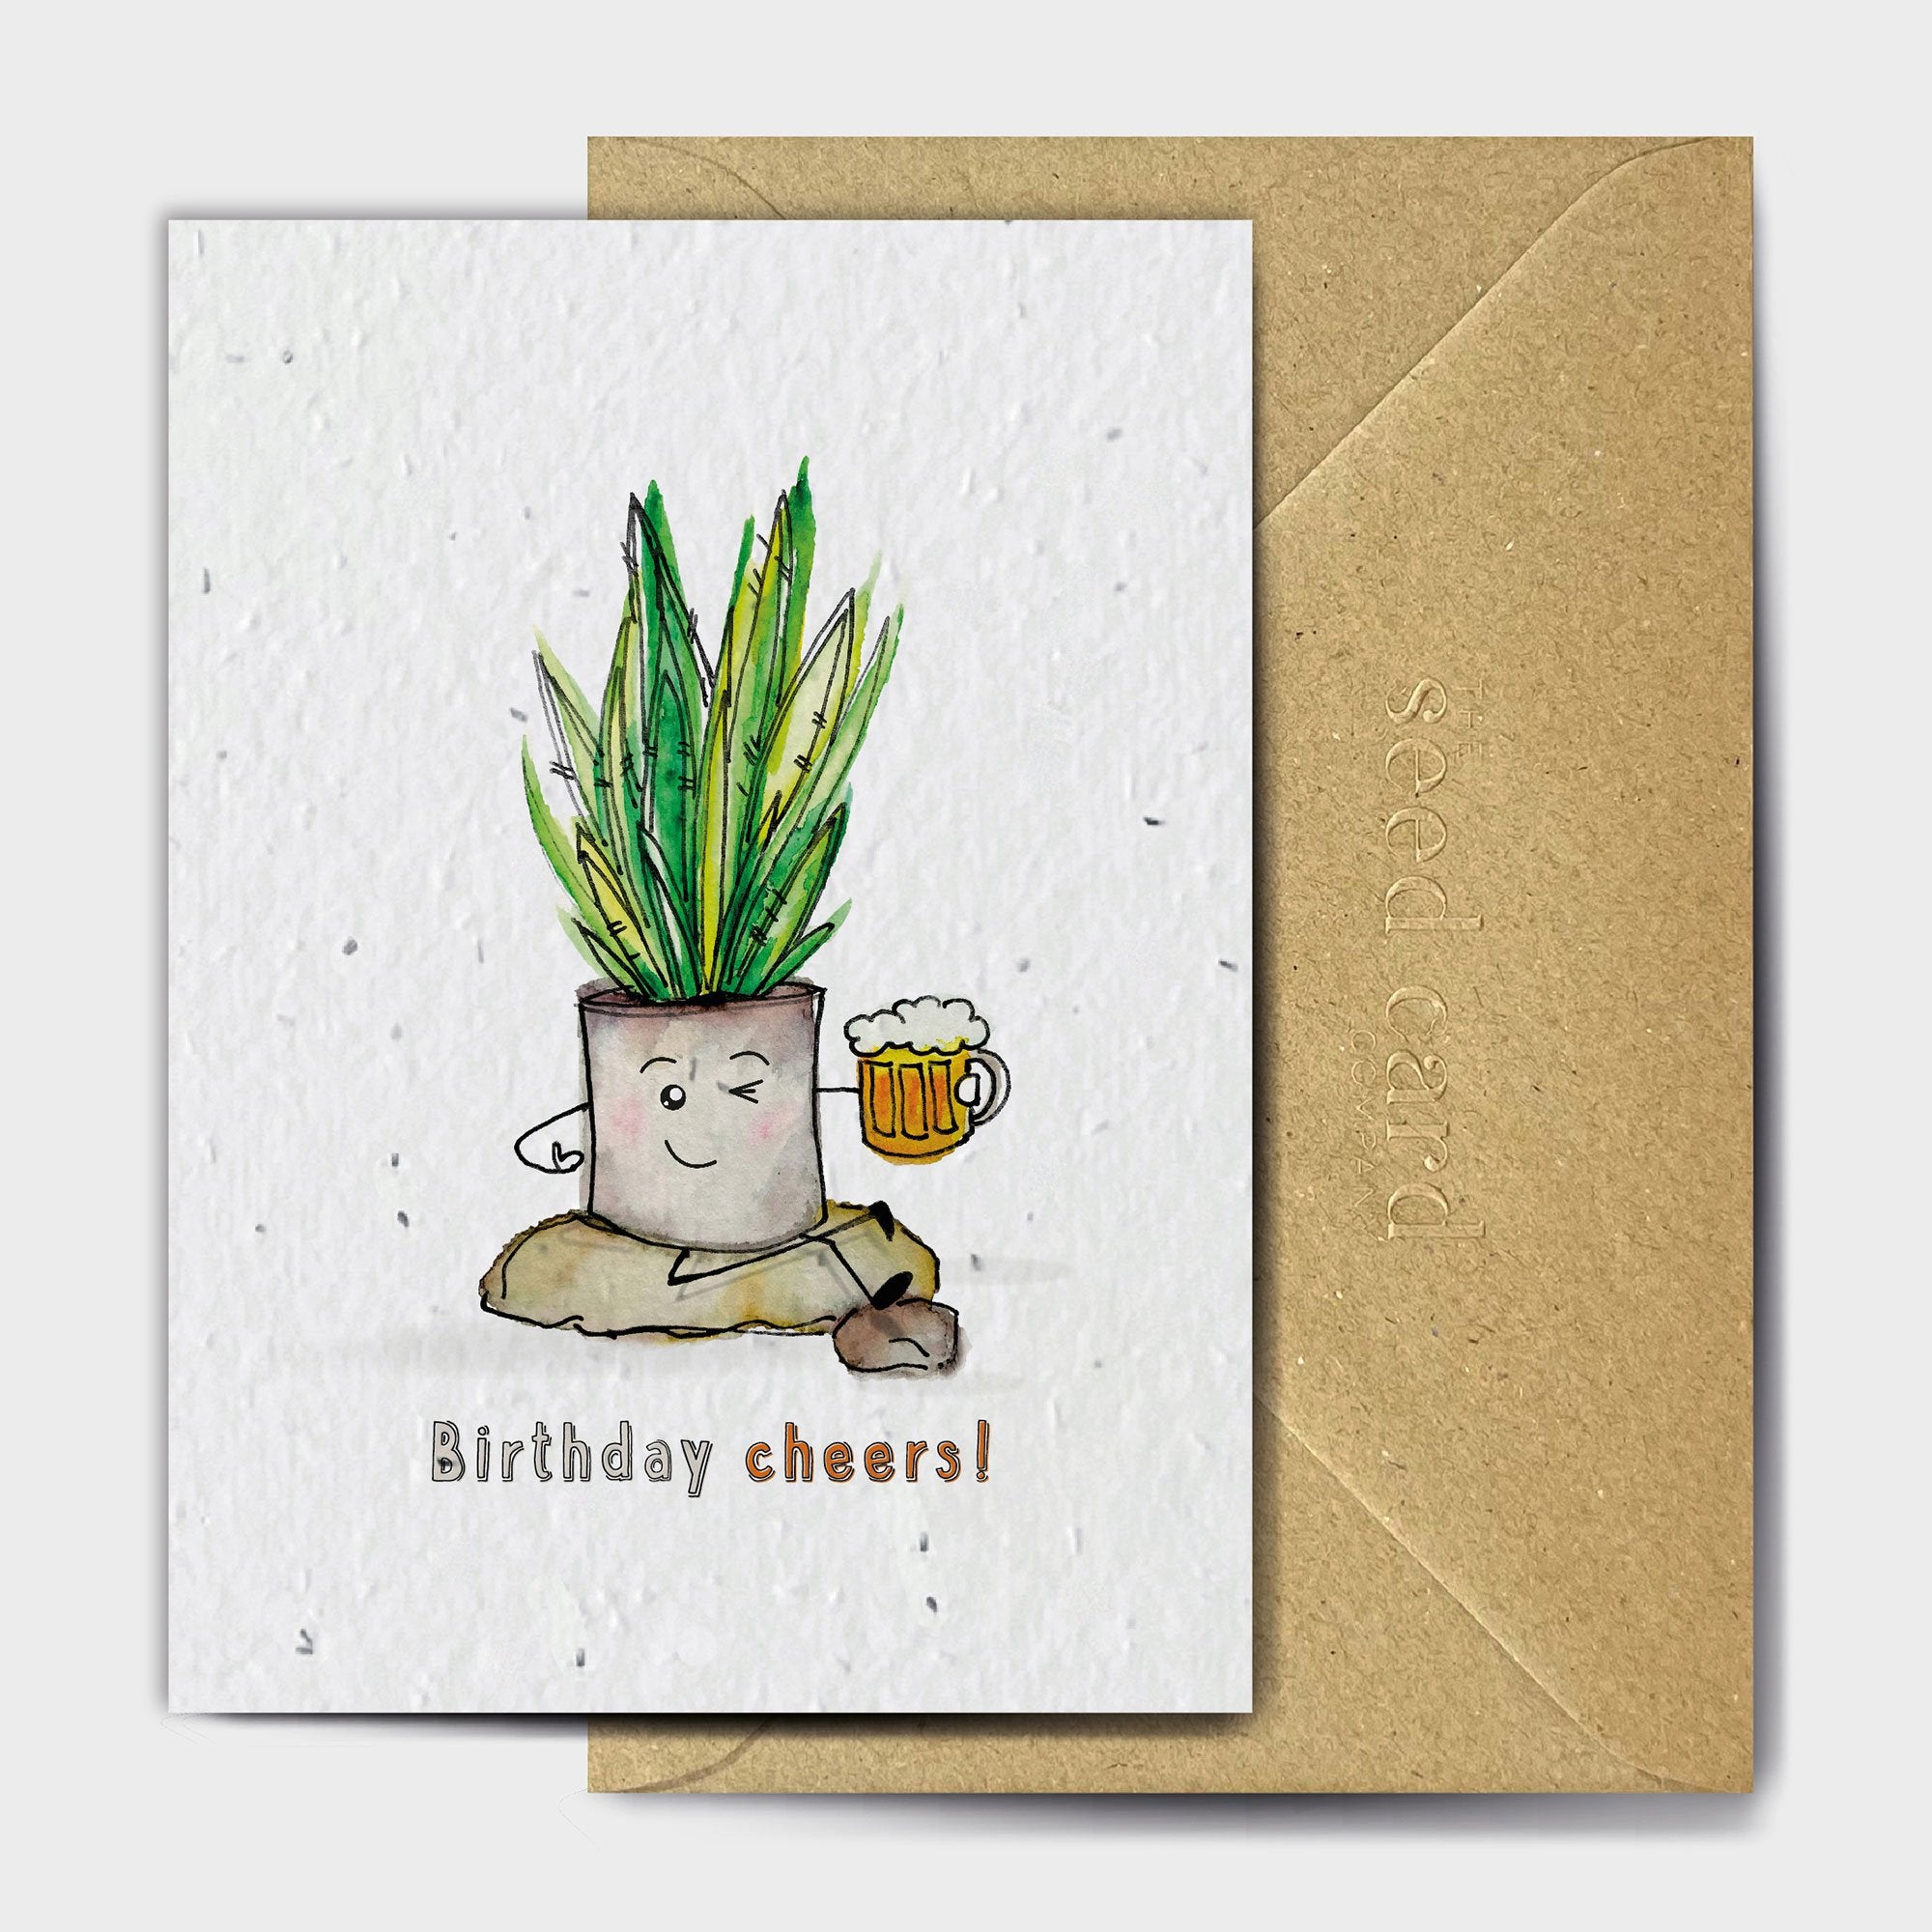 Shop online Birthday Beers - 100% biodegradable seed-embedded cards Shop -The Seed Card Company